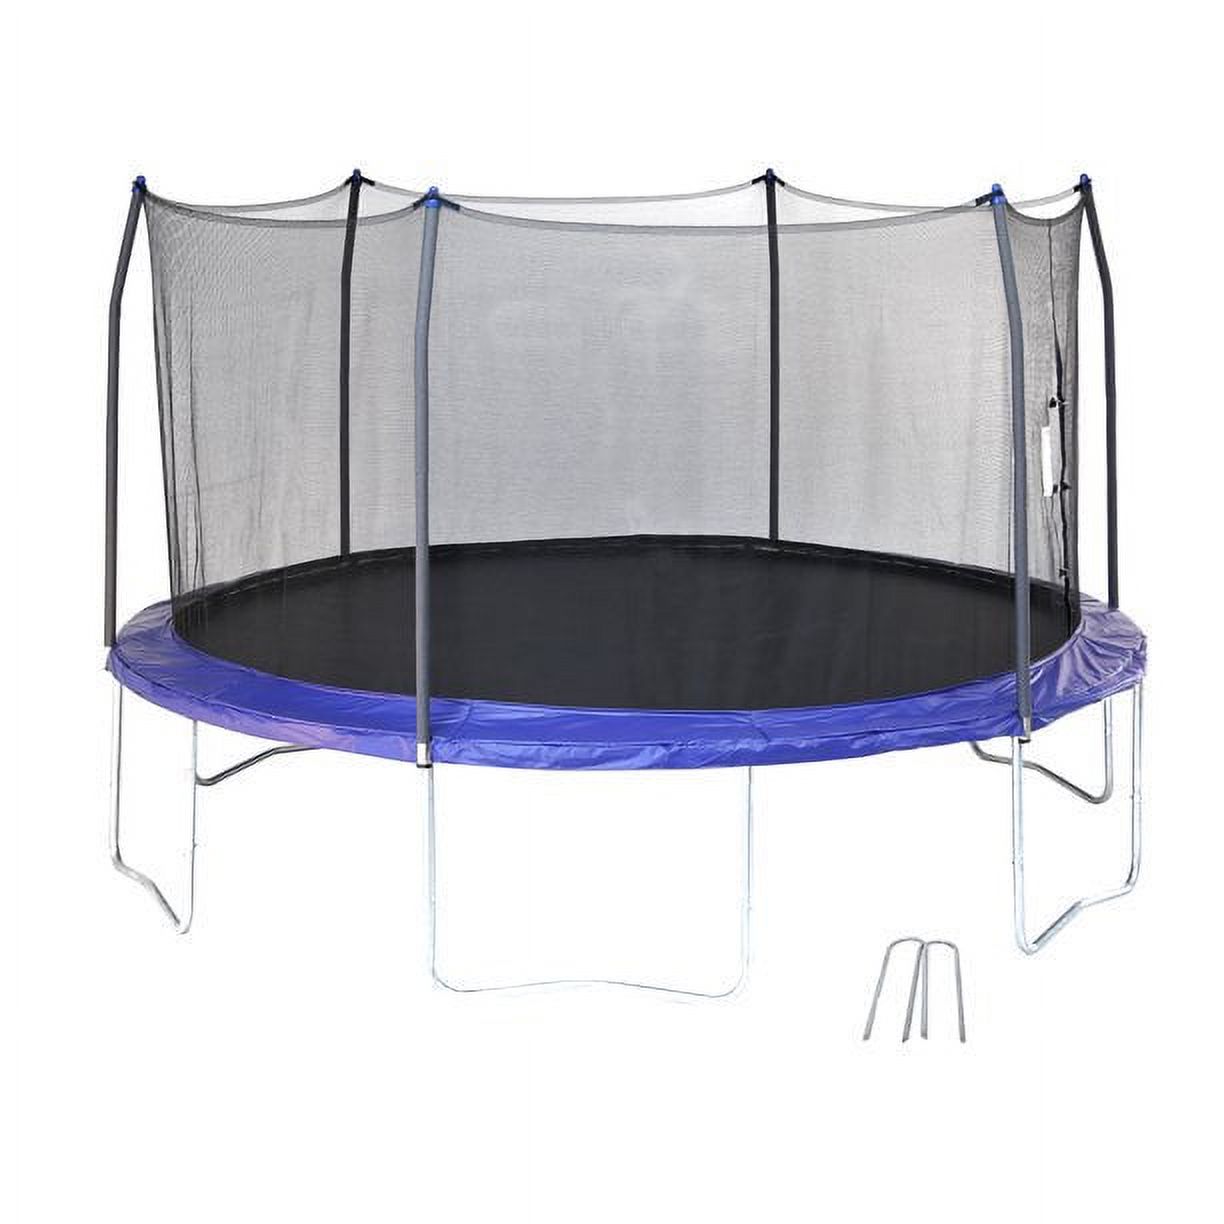 Skywalker Trampolines 14' Trampoline, with Wind Stakes, Bright Blue - image 1 of 2